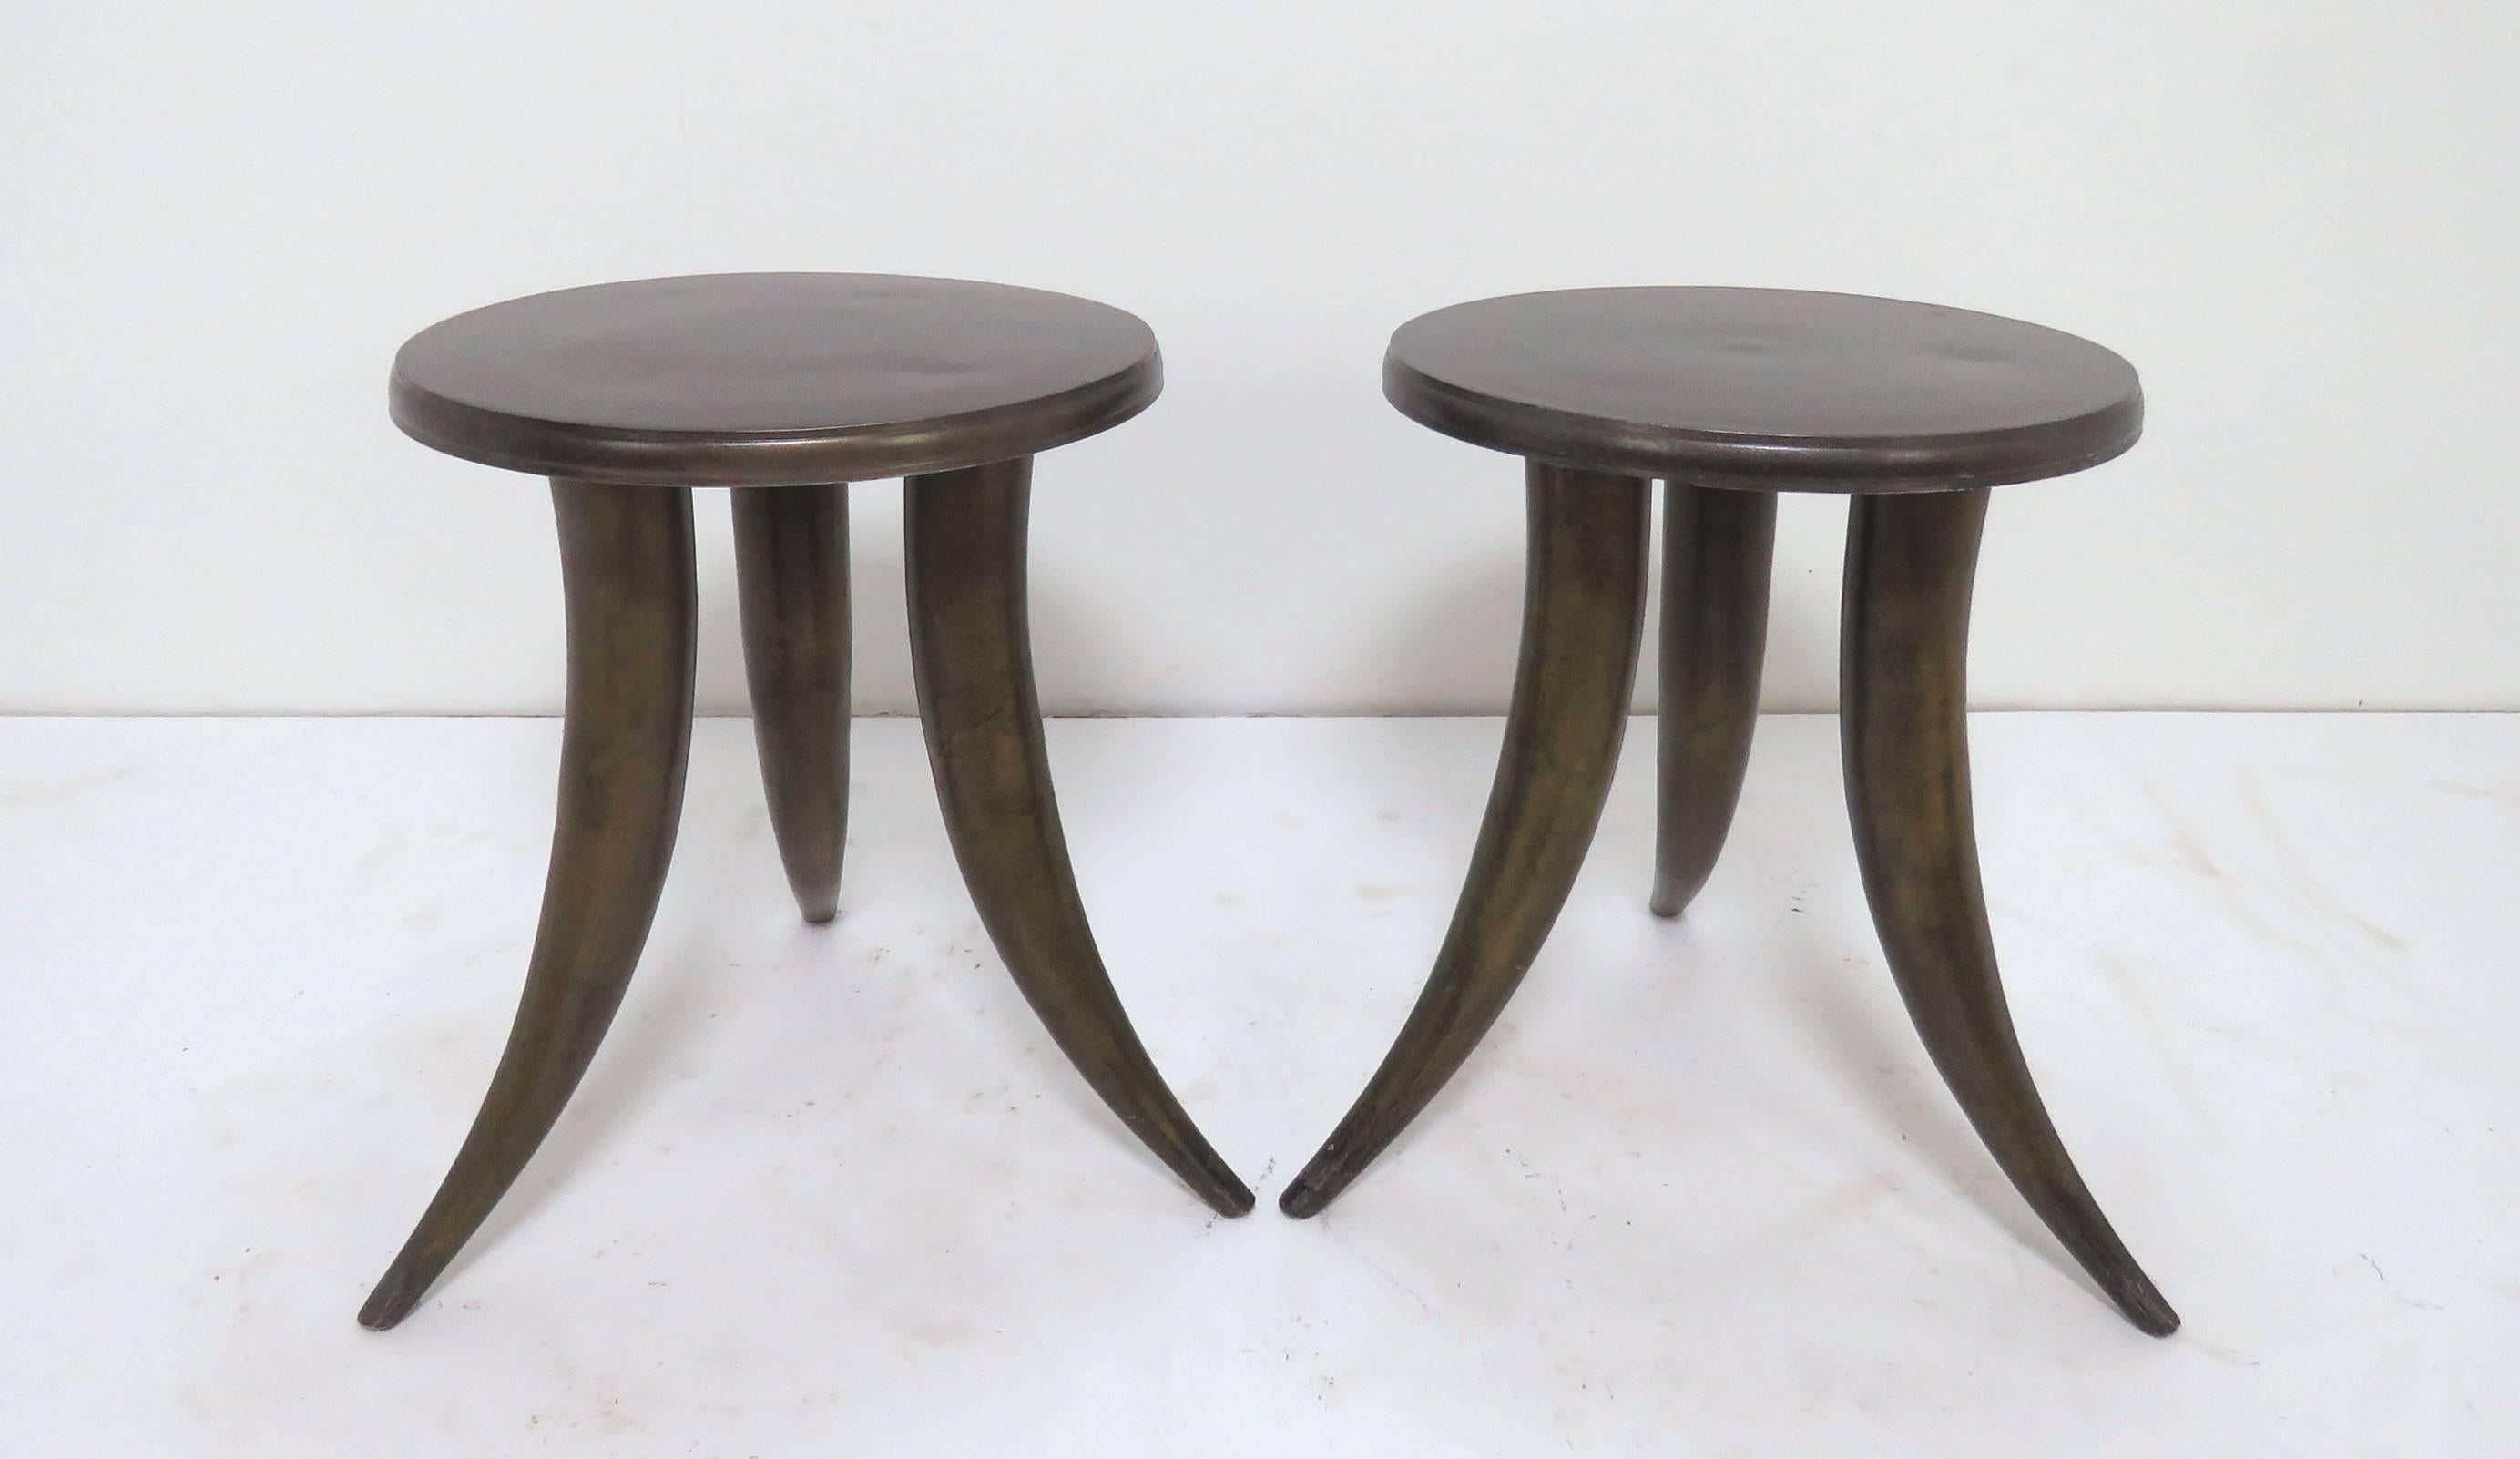 Pair of side tables in metal with a bronzed finish and tusk-form legs, circa 1960s. Sturdy enough to serve as stools as well.